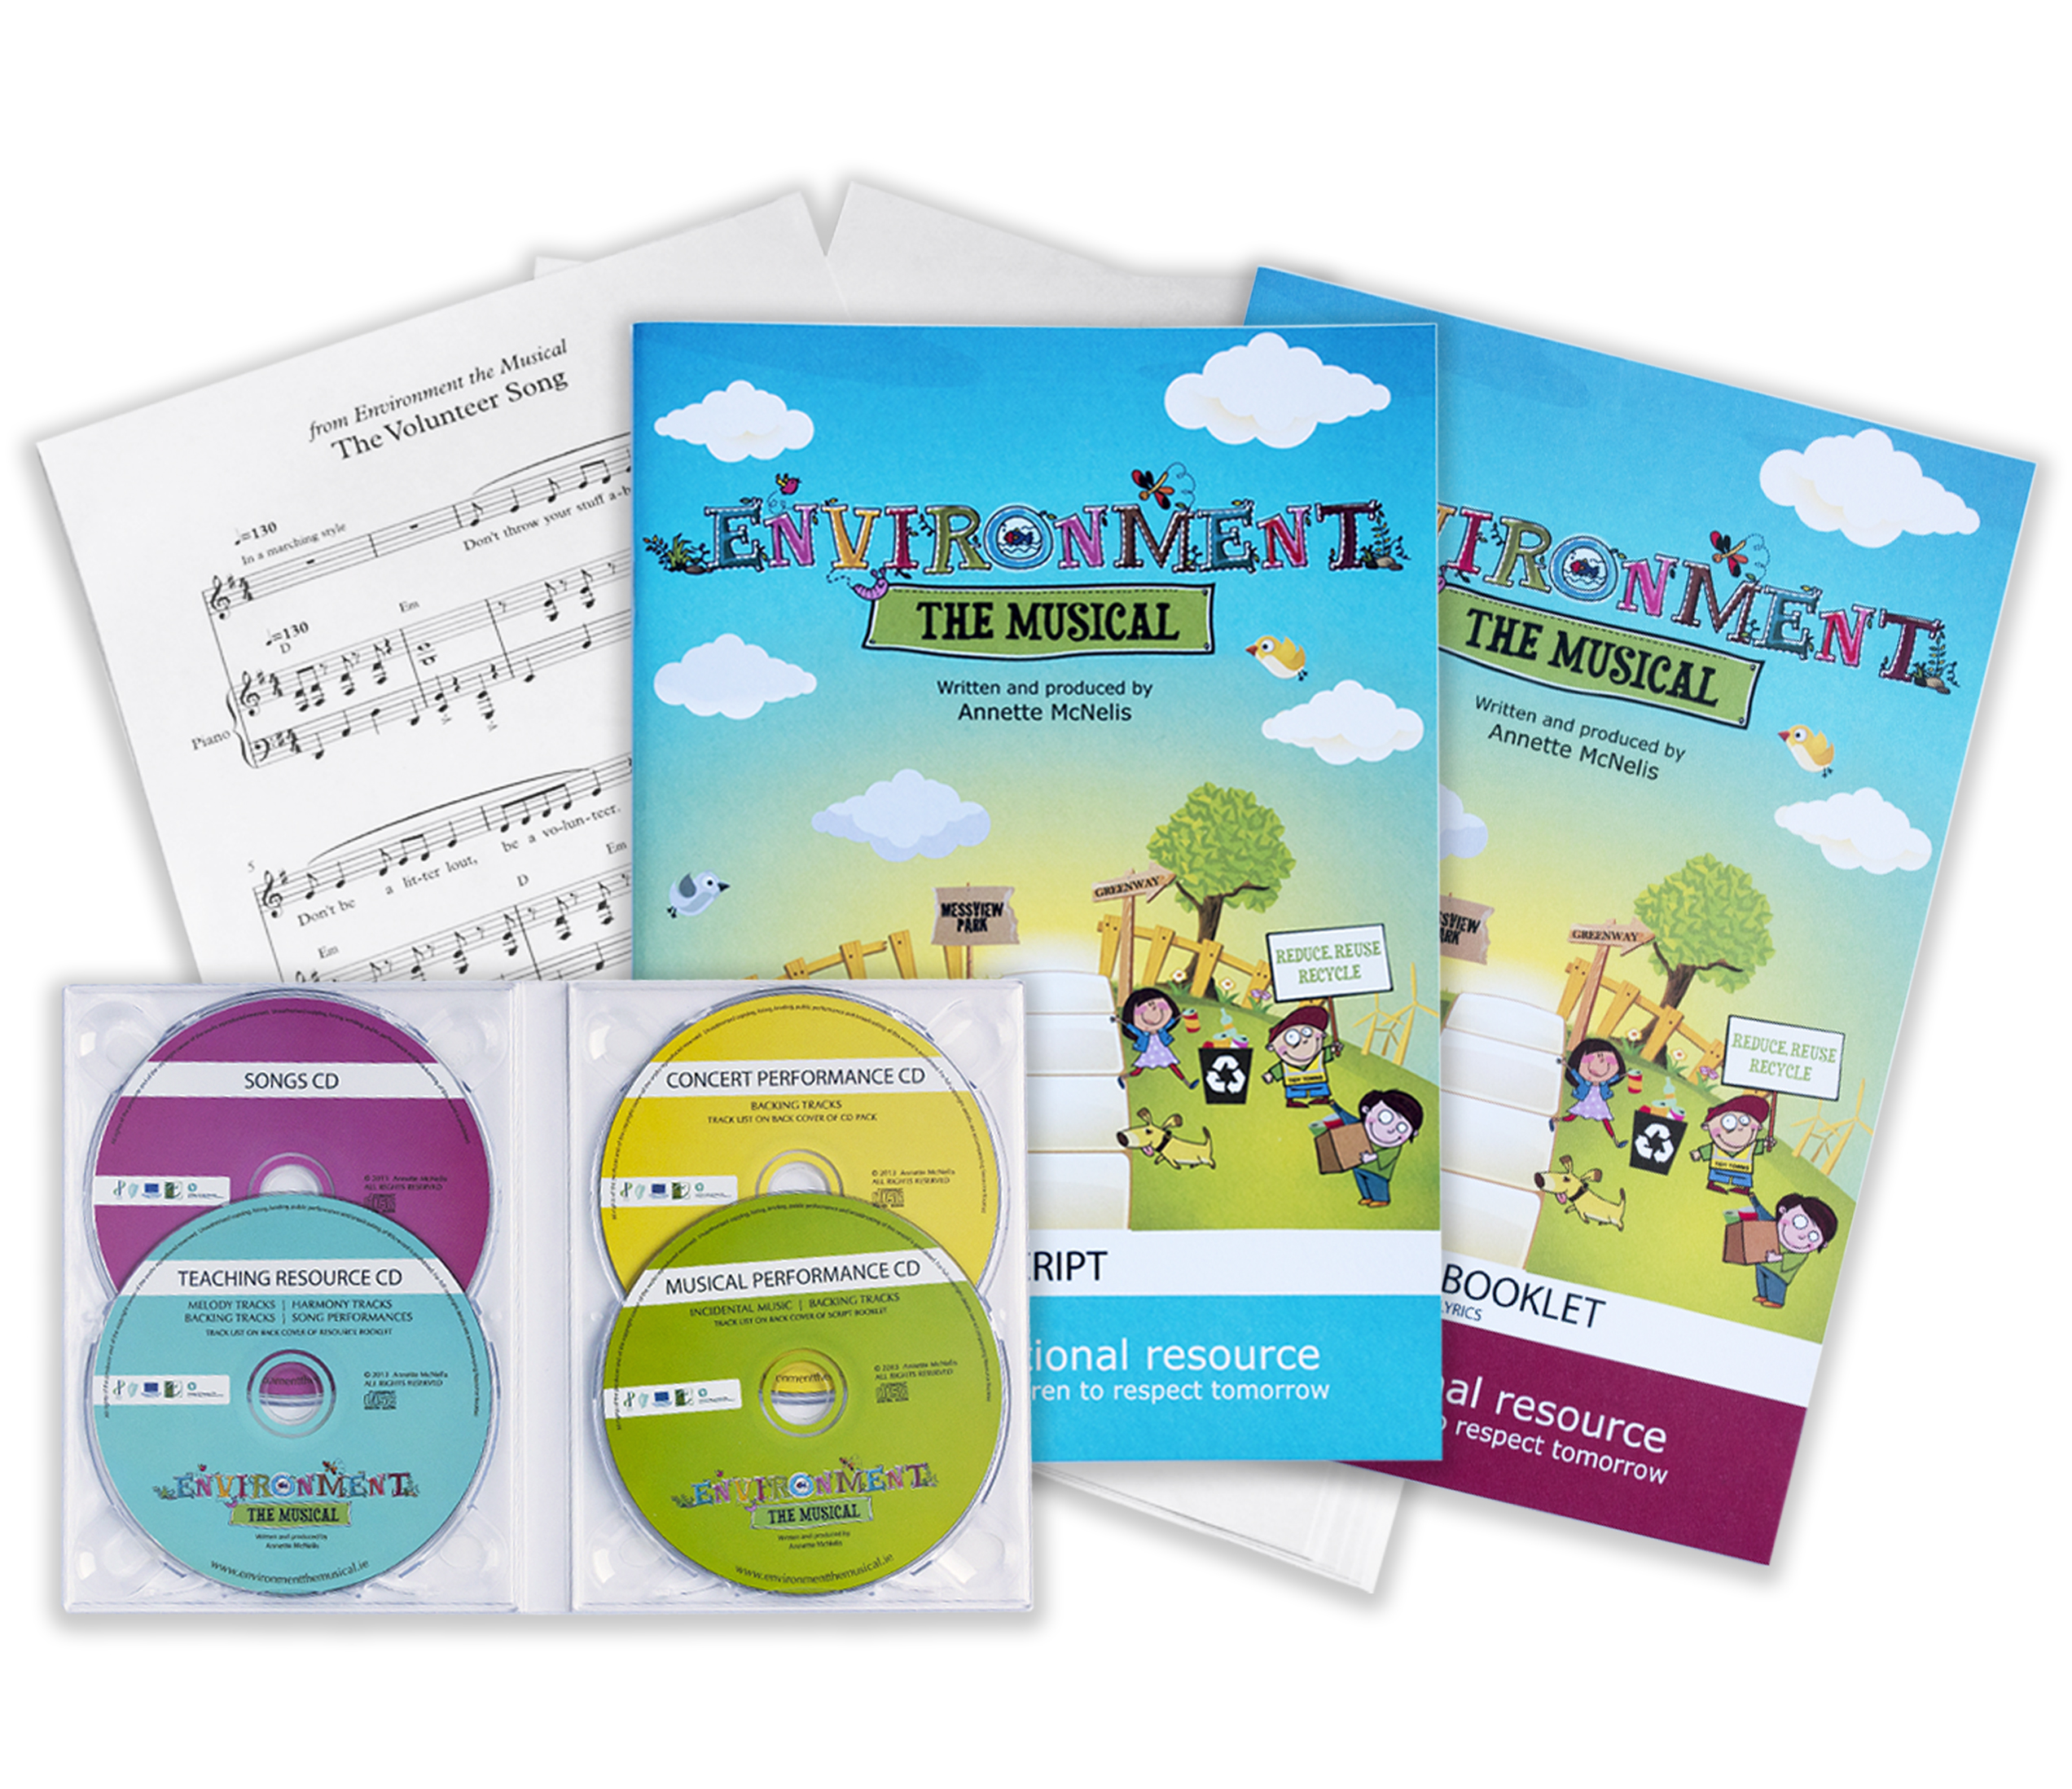 ETM Pack Image with Sheet Music &amp; Open CD Box.